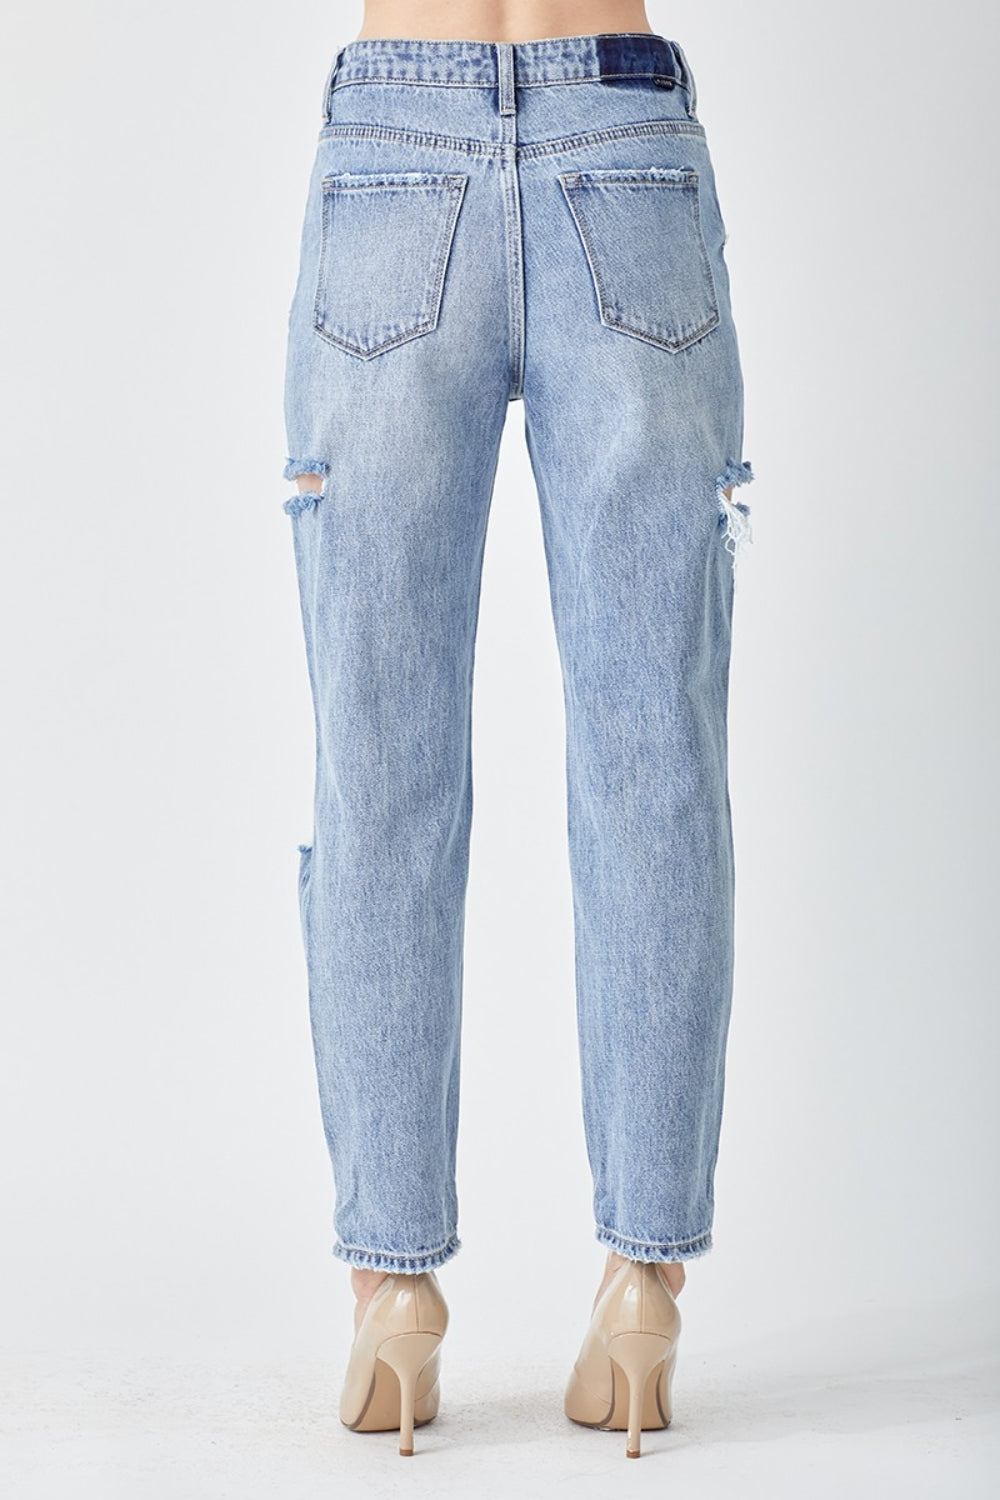 RISEN Distressed Slim Cropped Jeans - Jeans - FITGGINS